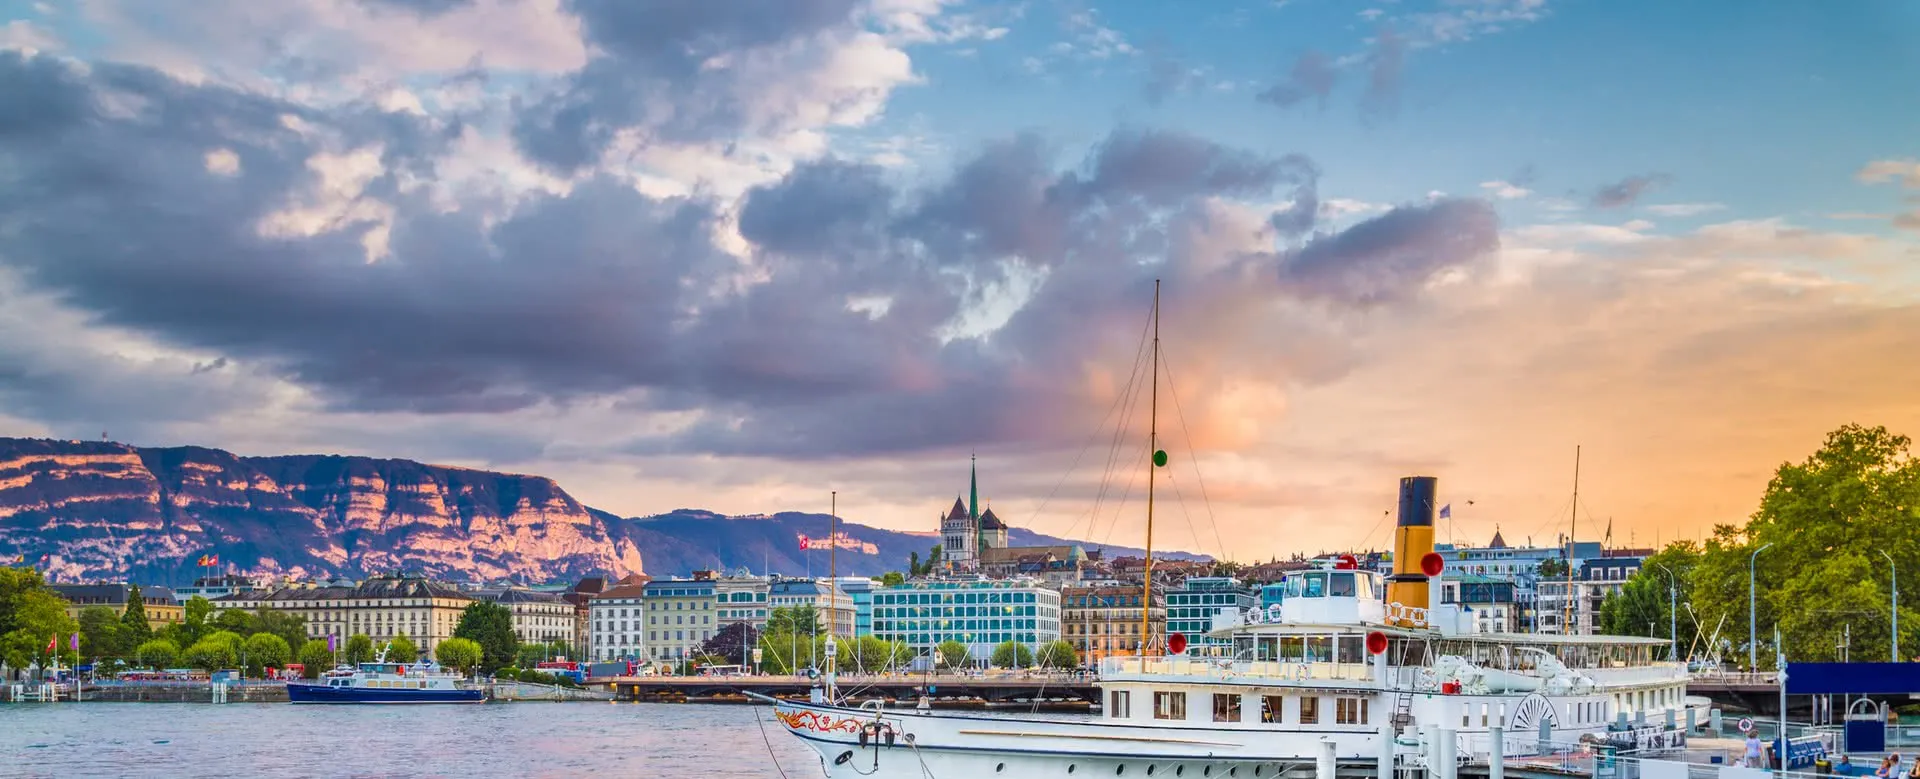 Geneva - the destination for group hotels with parking spaces